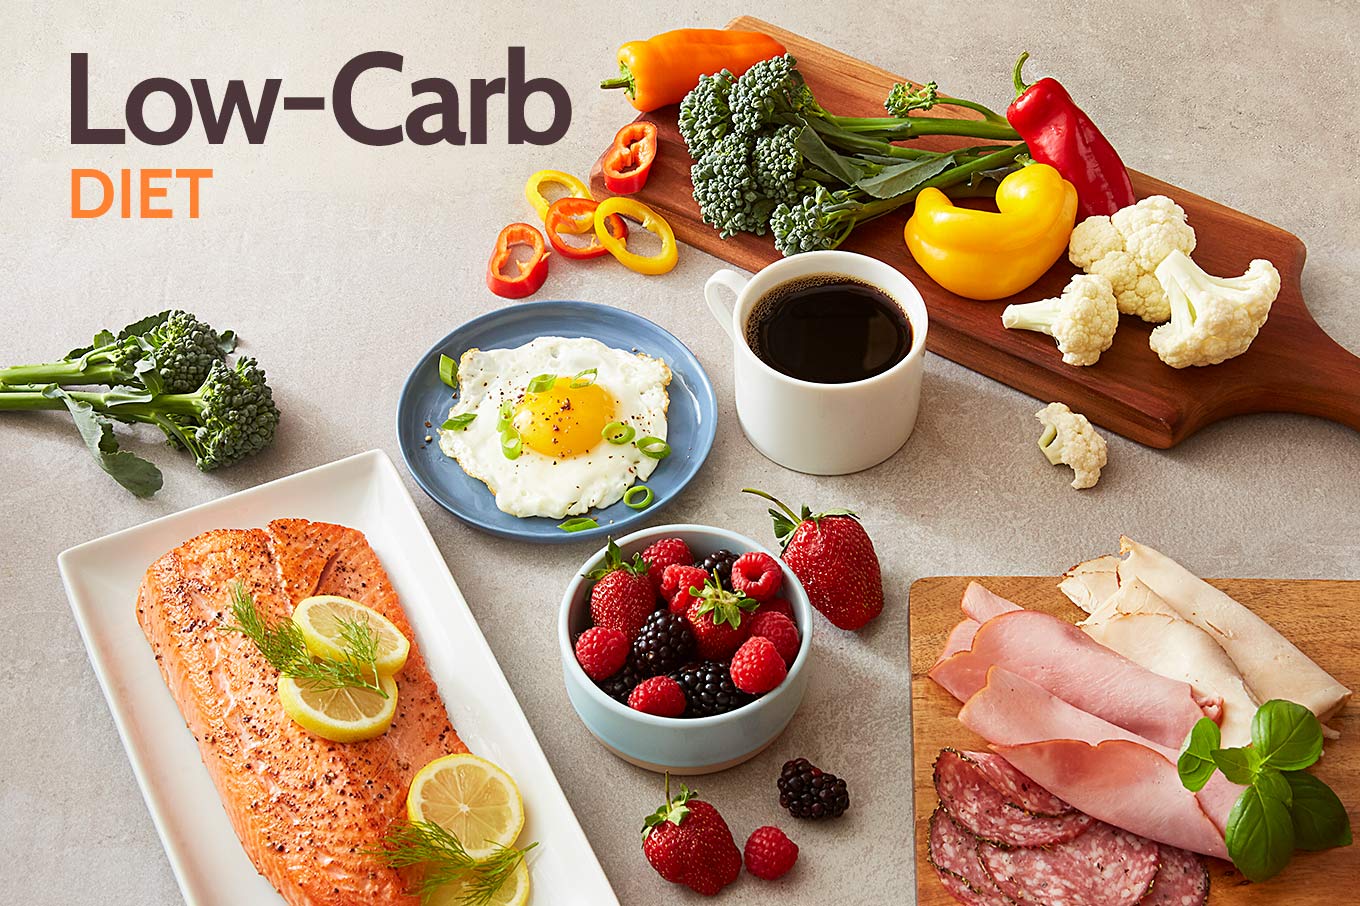 Eat Low Carb Food for weight loss